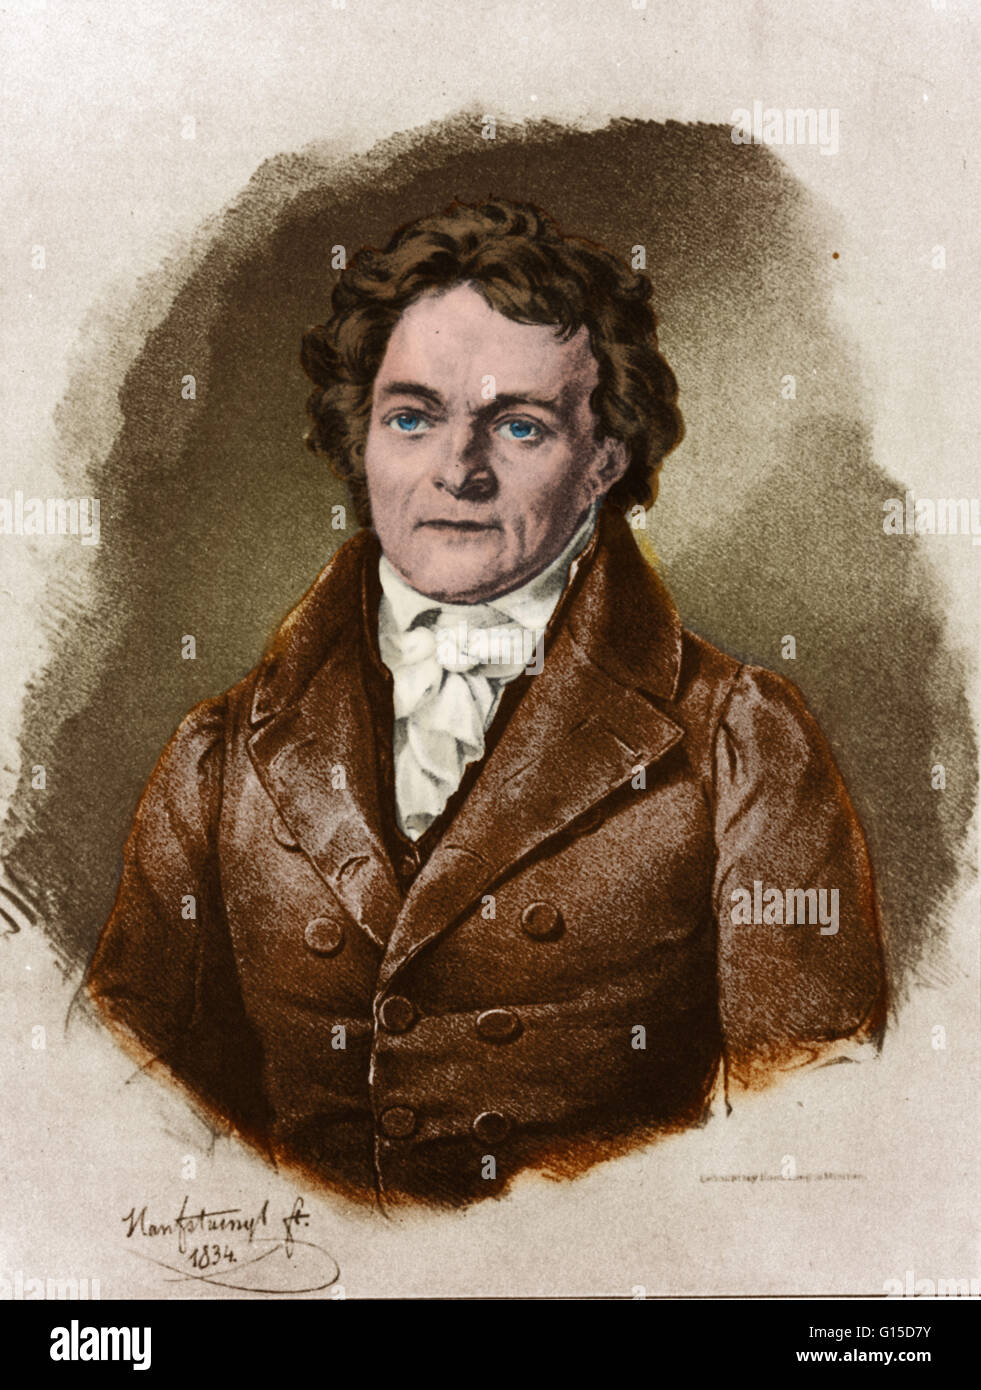 Johann Alois Senefelder (November 6, 1771 - February 26, 1834) was a German actor and playwright who invented the printing technique of lithography in 1796. He experimented with a novel etching technique using a greasy, acid resistant ink as a resist on a Stock Photo